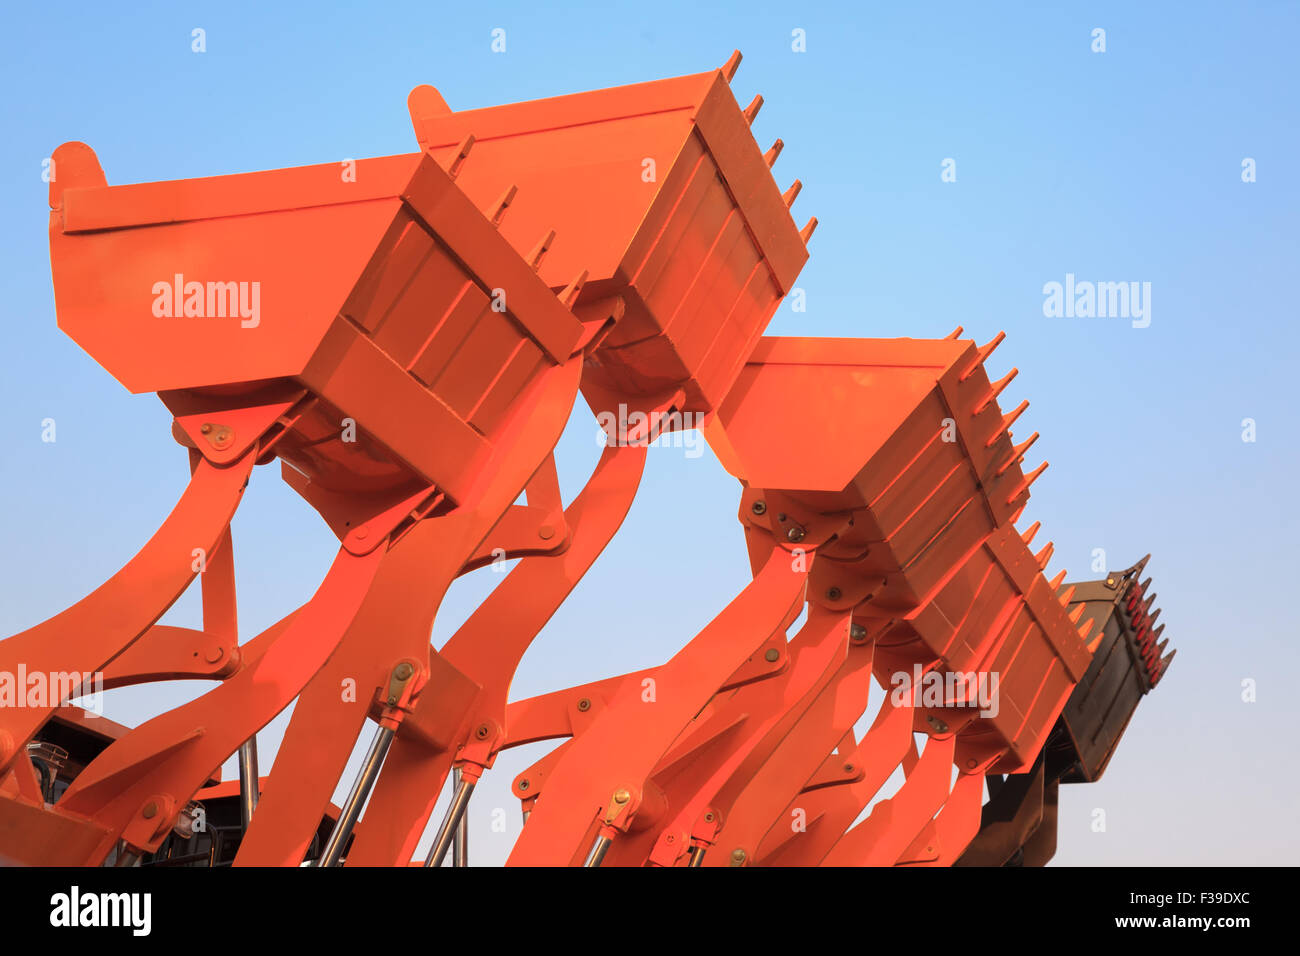 Part of modern yellow excavator machines,the buckets/shovels raised against blue sky in a construction site. Stock Photo